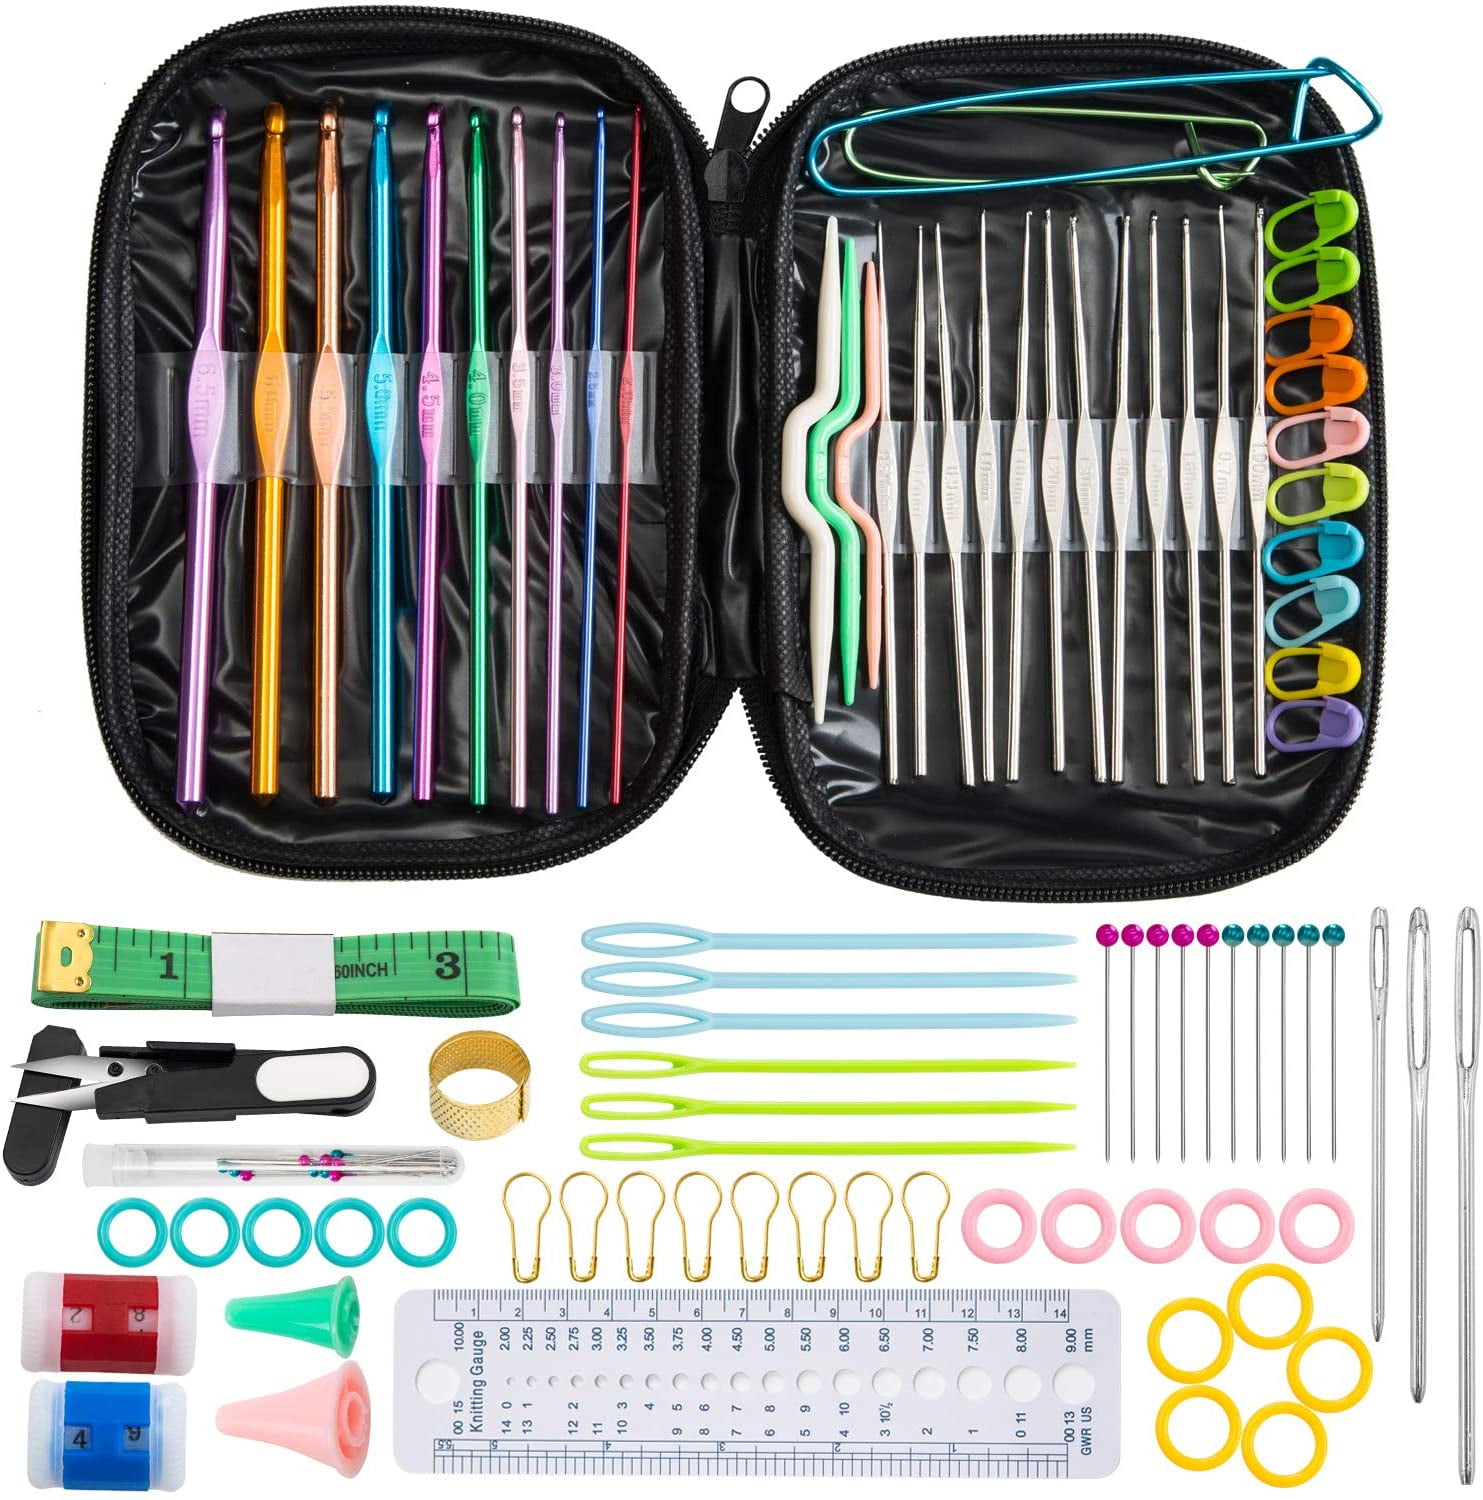 How To Knit Kit100pc Aluminum Crochet Hook & Knitting Needle Set - Sewing  Accessories